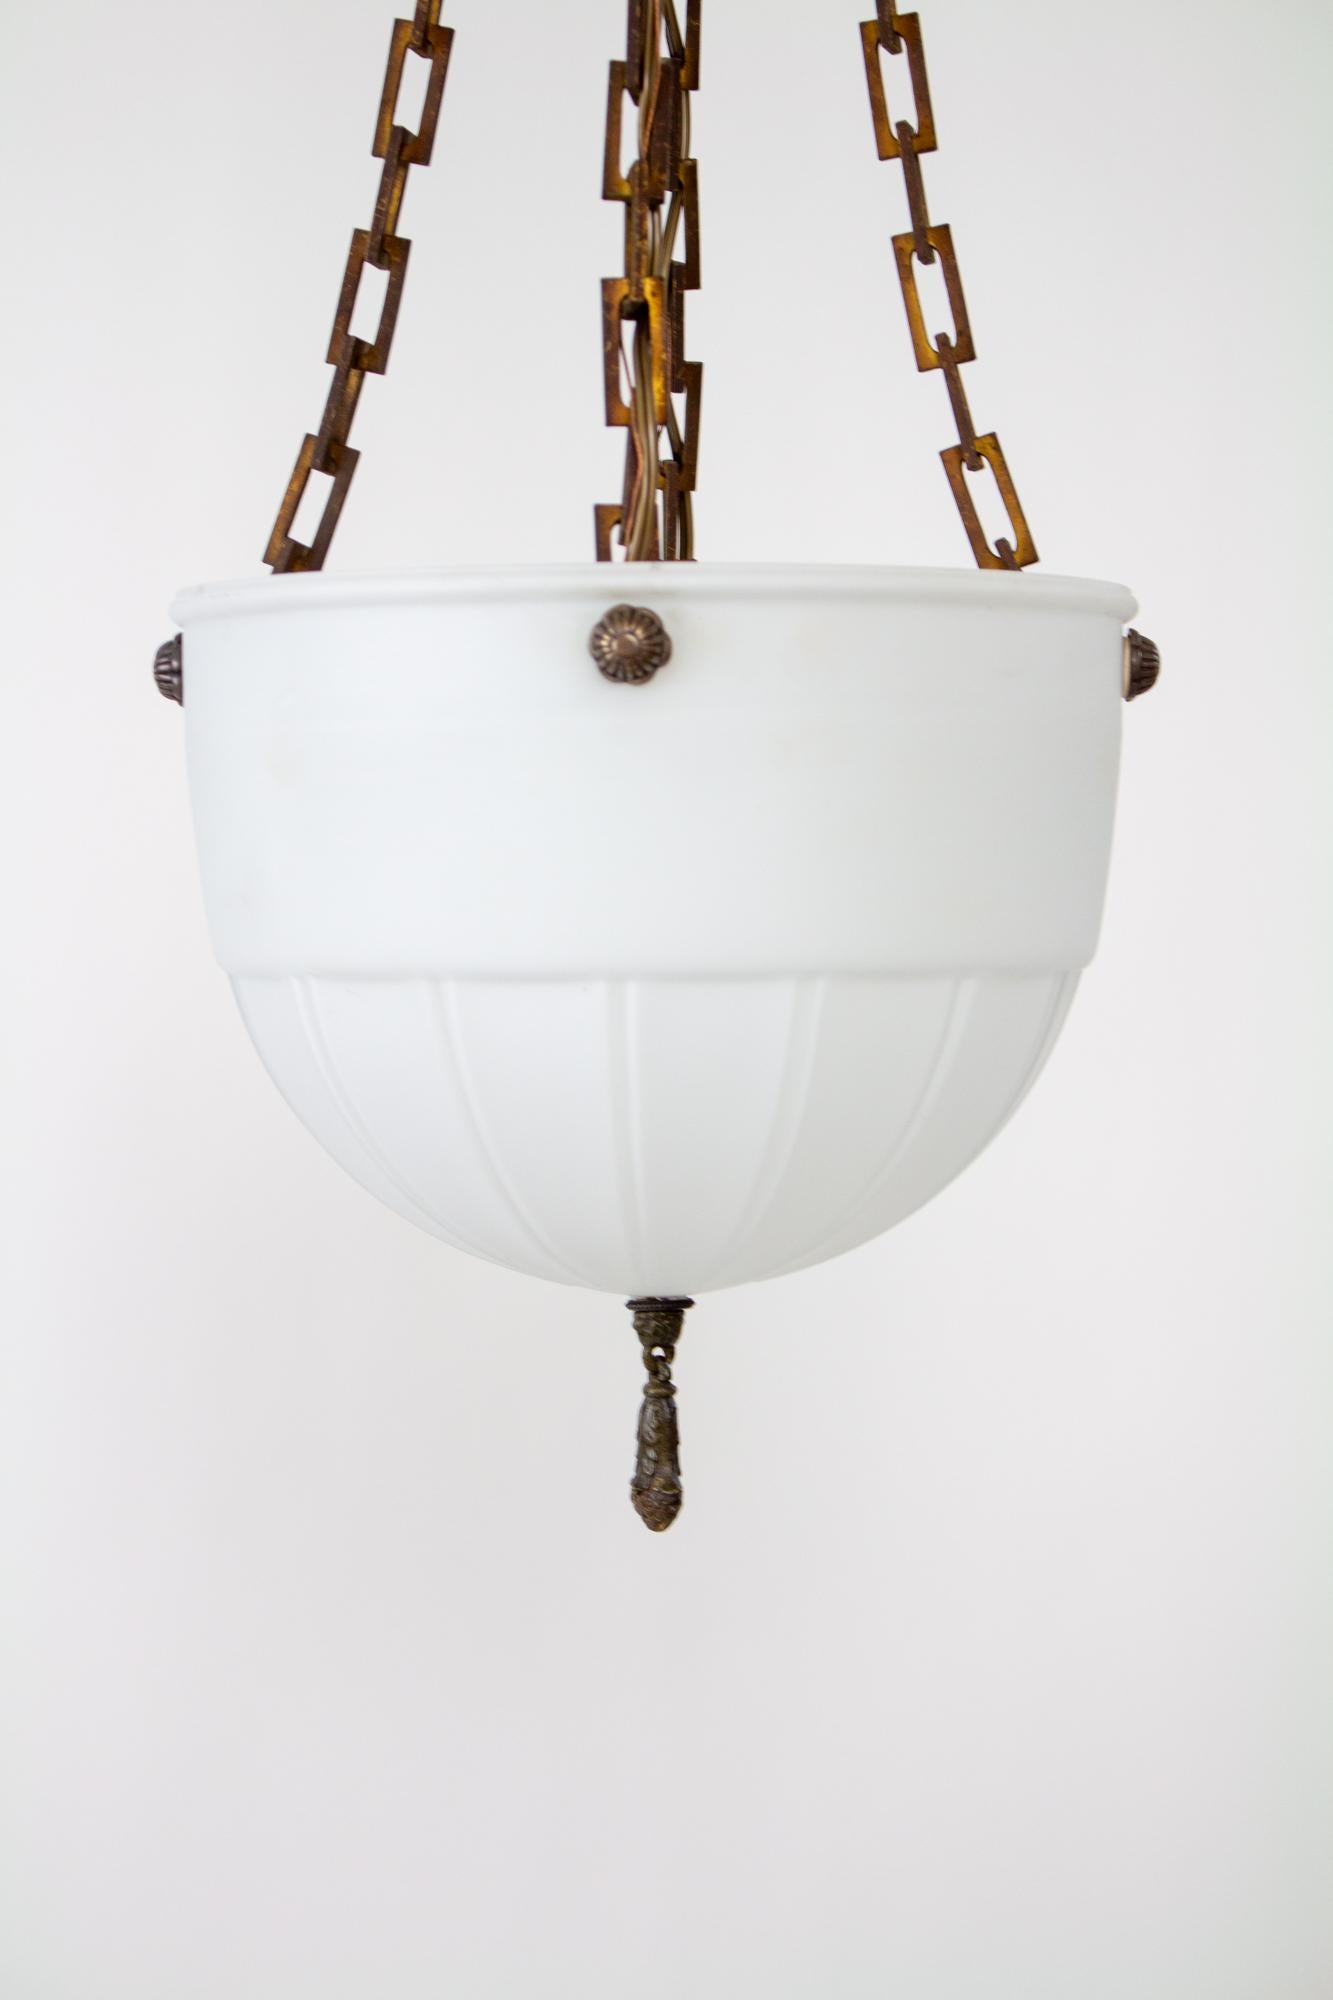 Early 20th Century Neoclassical Bowl Fixture In Good Condition For Sale In Canton, MA